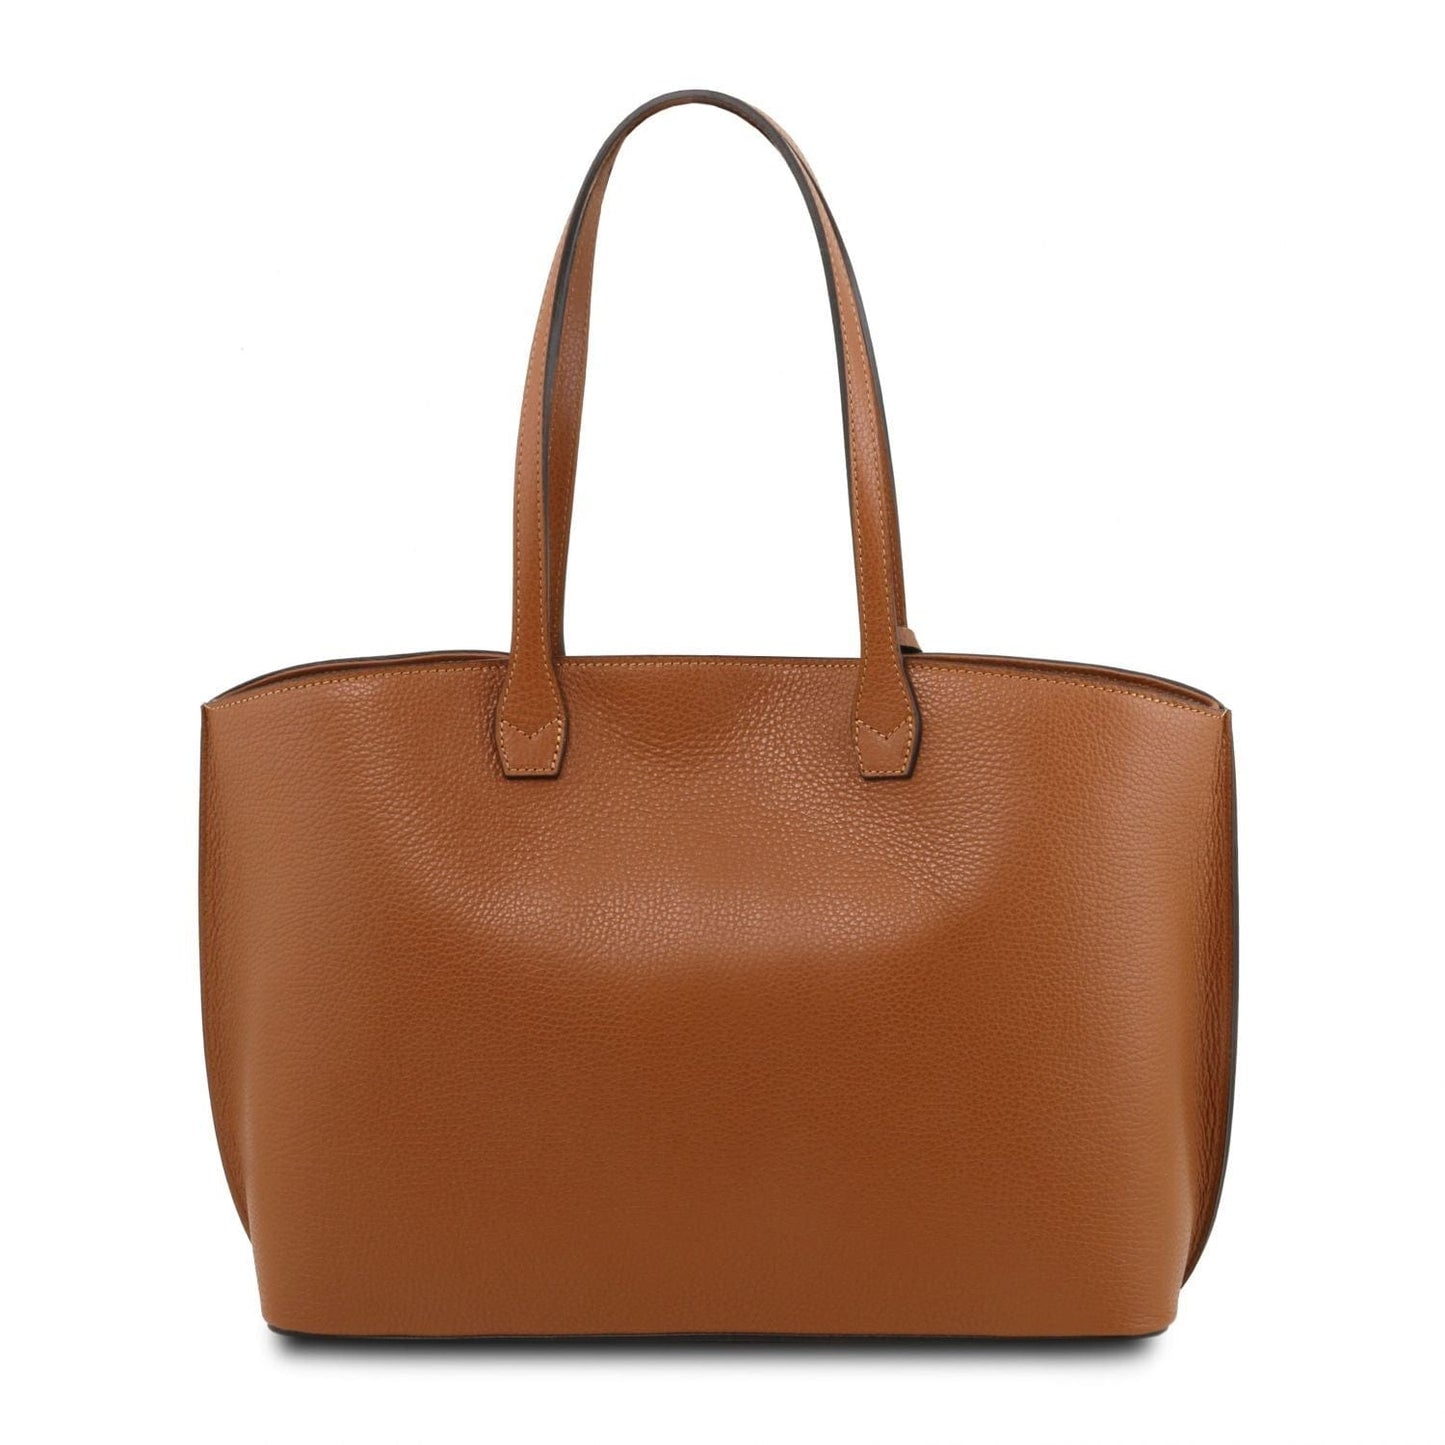 TL Bag - Leather shopping bag | TL141828 - Premium Leather shoulder bags - Shop now at San Rocco Italia